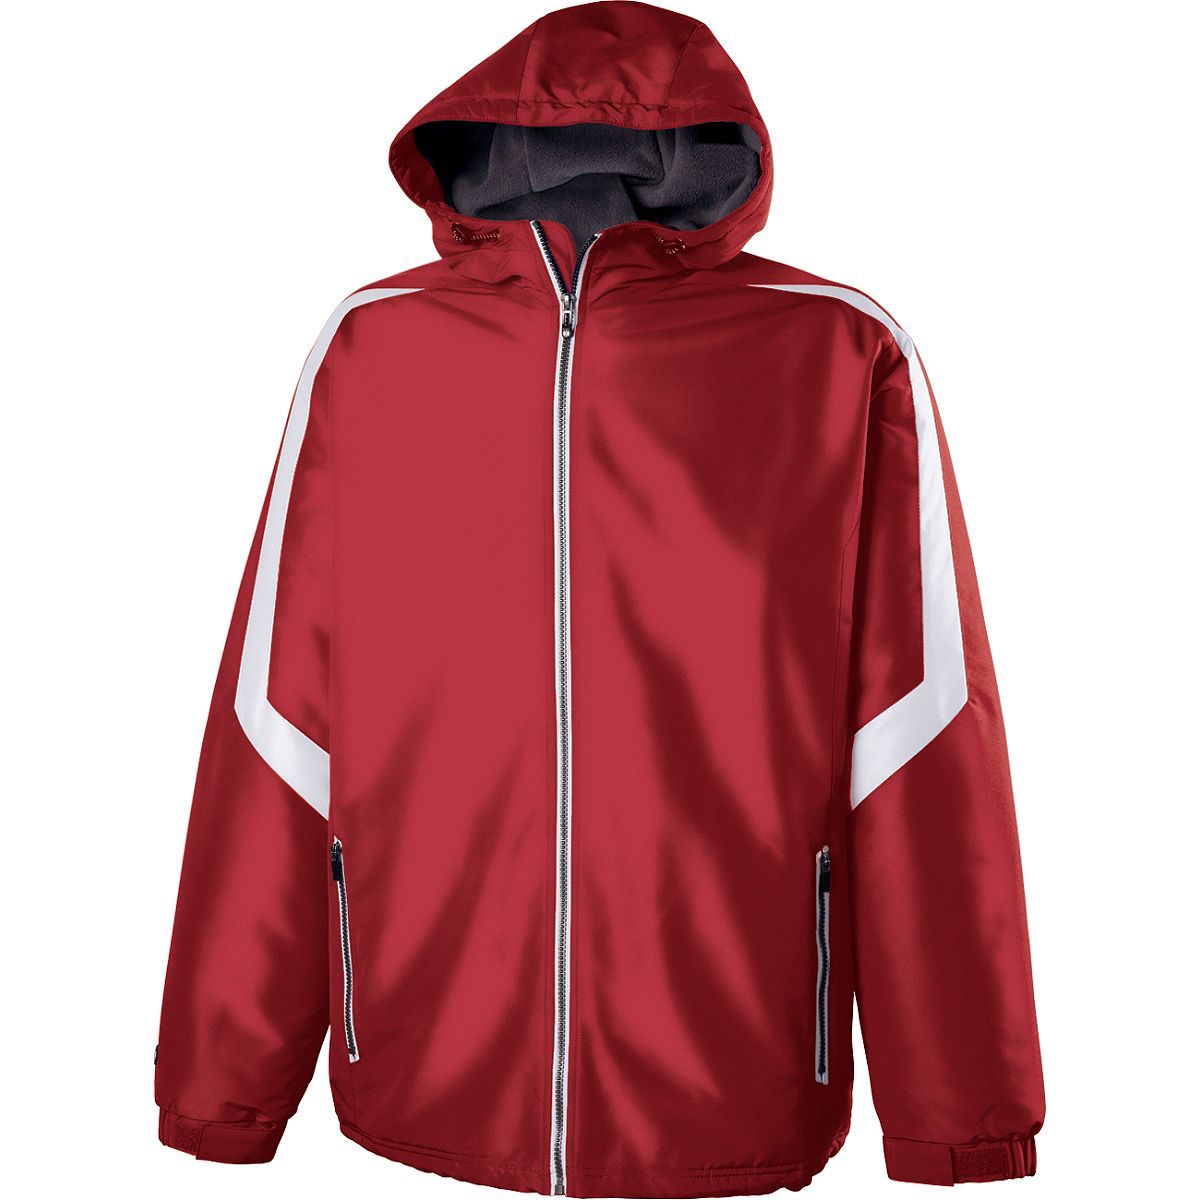 Holloway Sportswear XL Charger Jacket Scarlet/White 229059 - image 1 of 4